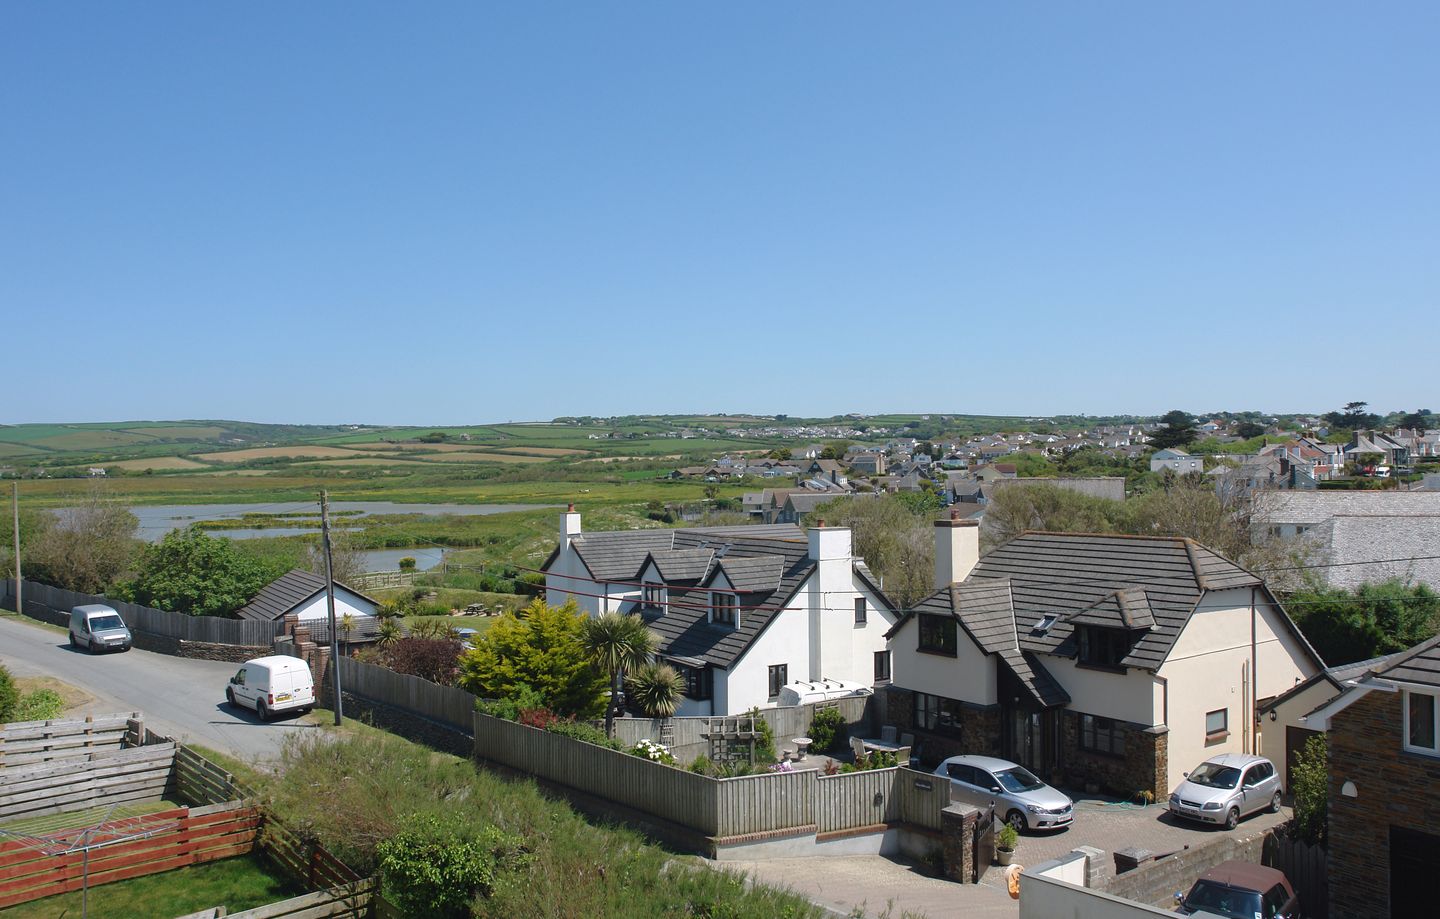 Holiday Cottage Reviews for 11 Hawkers Court - Self Catering Property in Bude, Cornwall inc Scilly